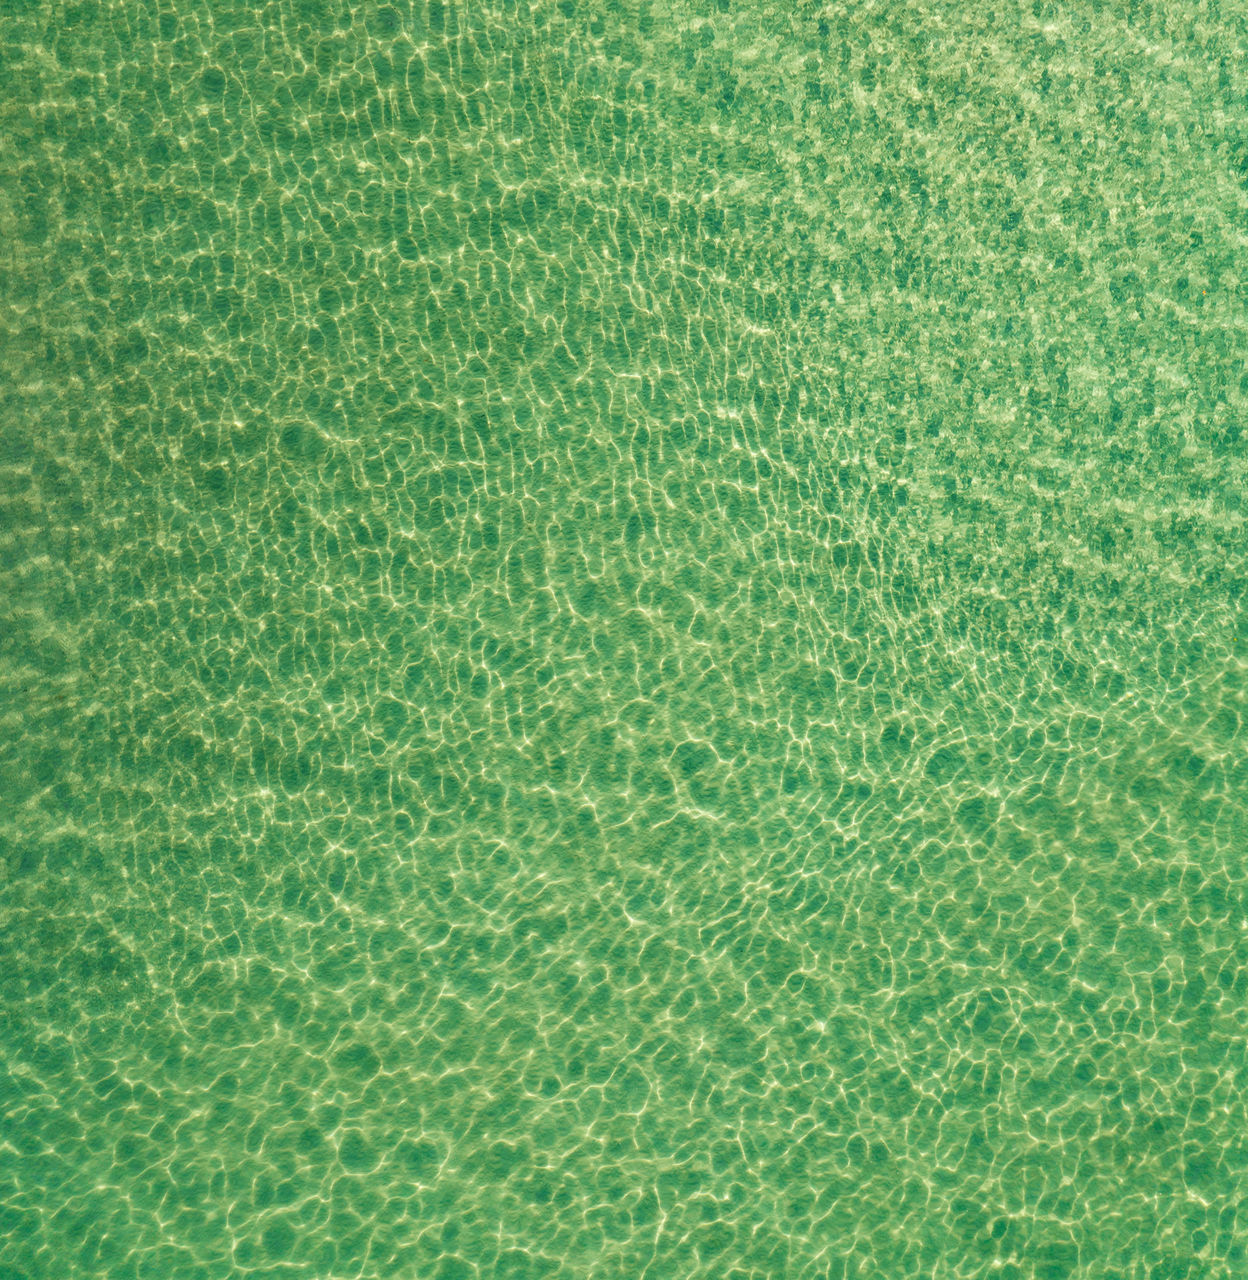 green, backgrounds, full frame, textured, grass, pattern, flooring, no people, sports, close-up, nature, lawn, net, leaf, high angle view, plant, day, abstract, textile, circle